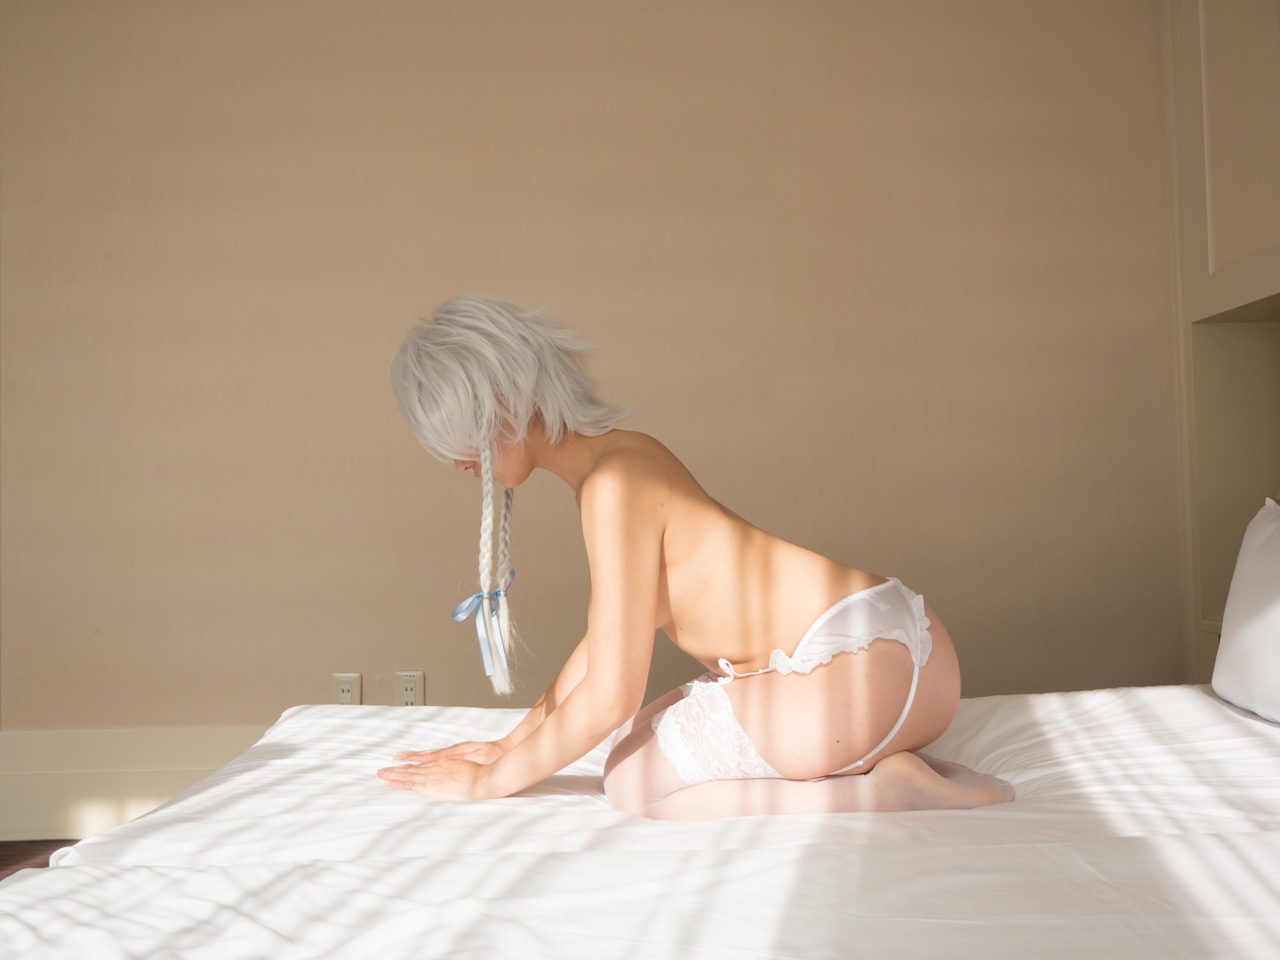 [Sakaki Cosplay Mistress] Sakaki Cosplay Mistress DL 001 (Touhou Project) 121